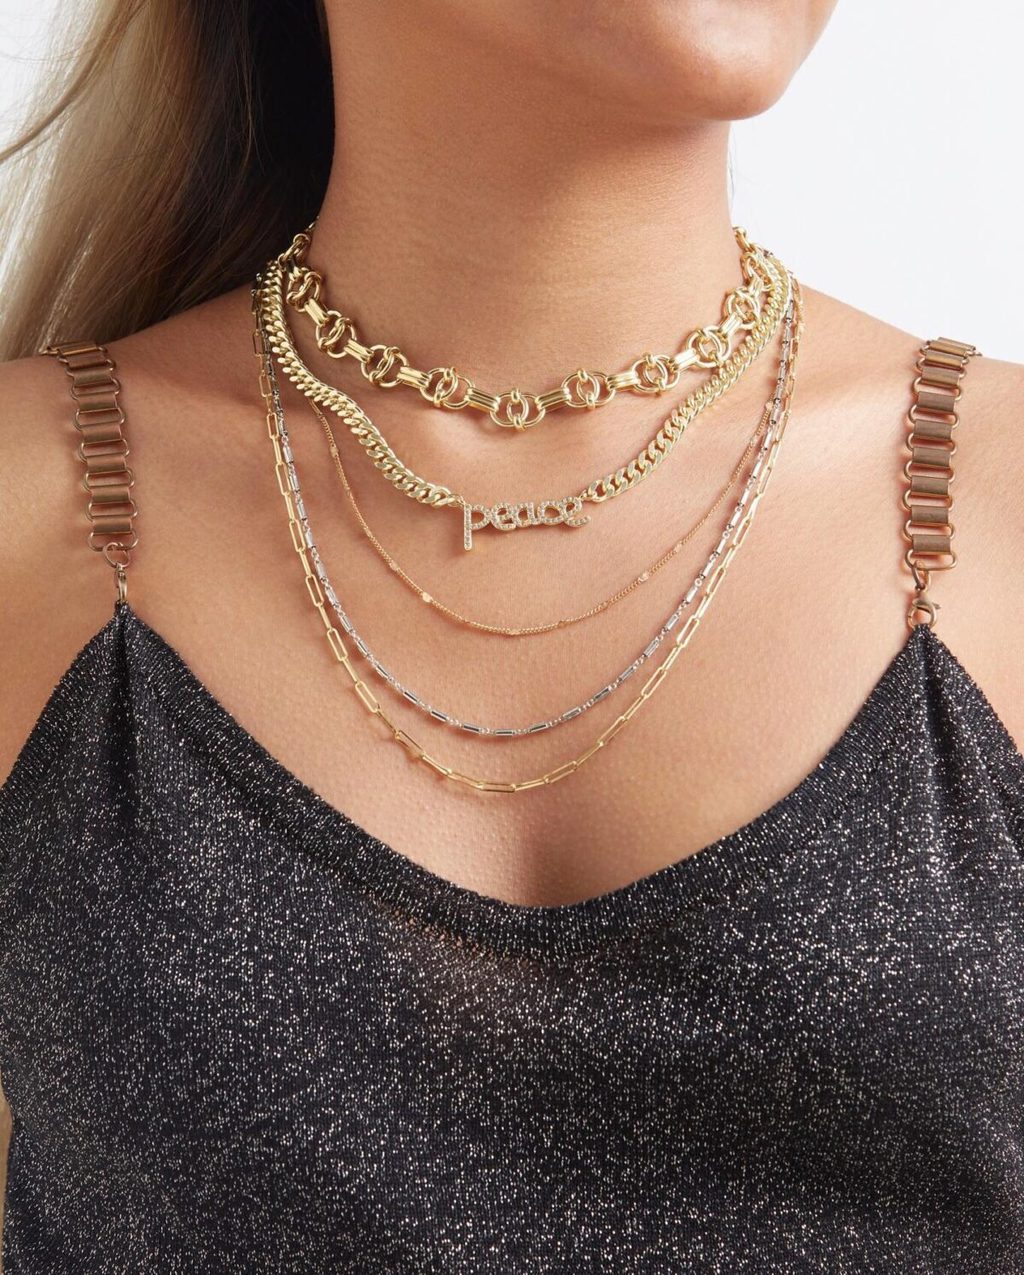 20 Best Accessories & Jewelry For Mom This Mother’S Day